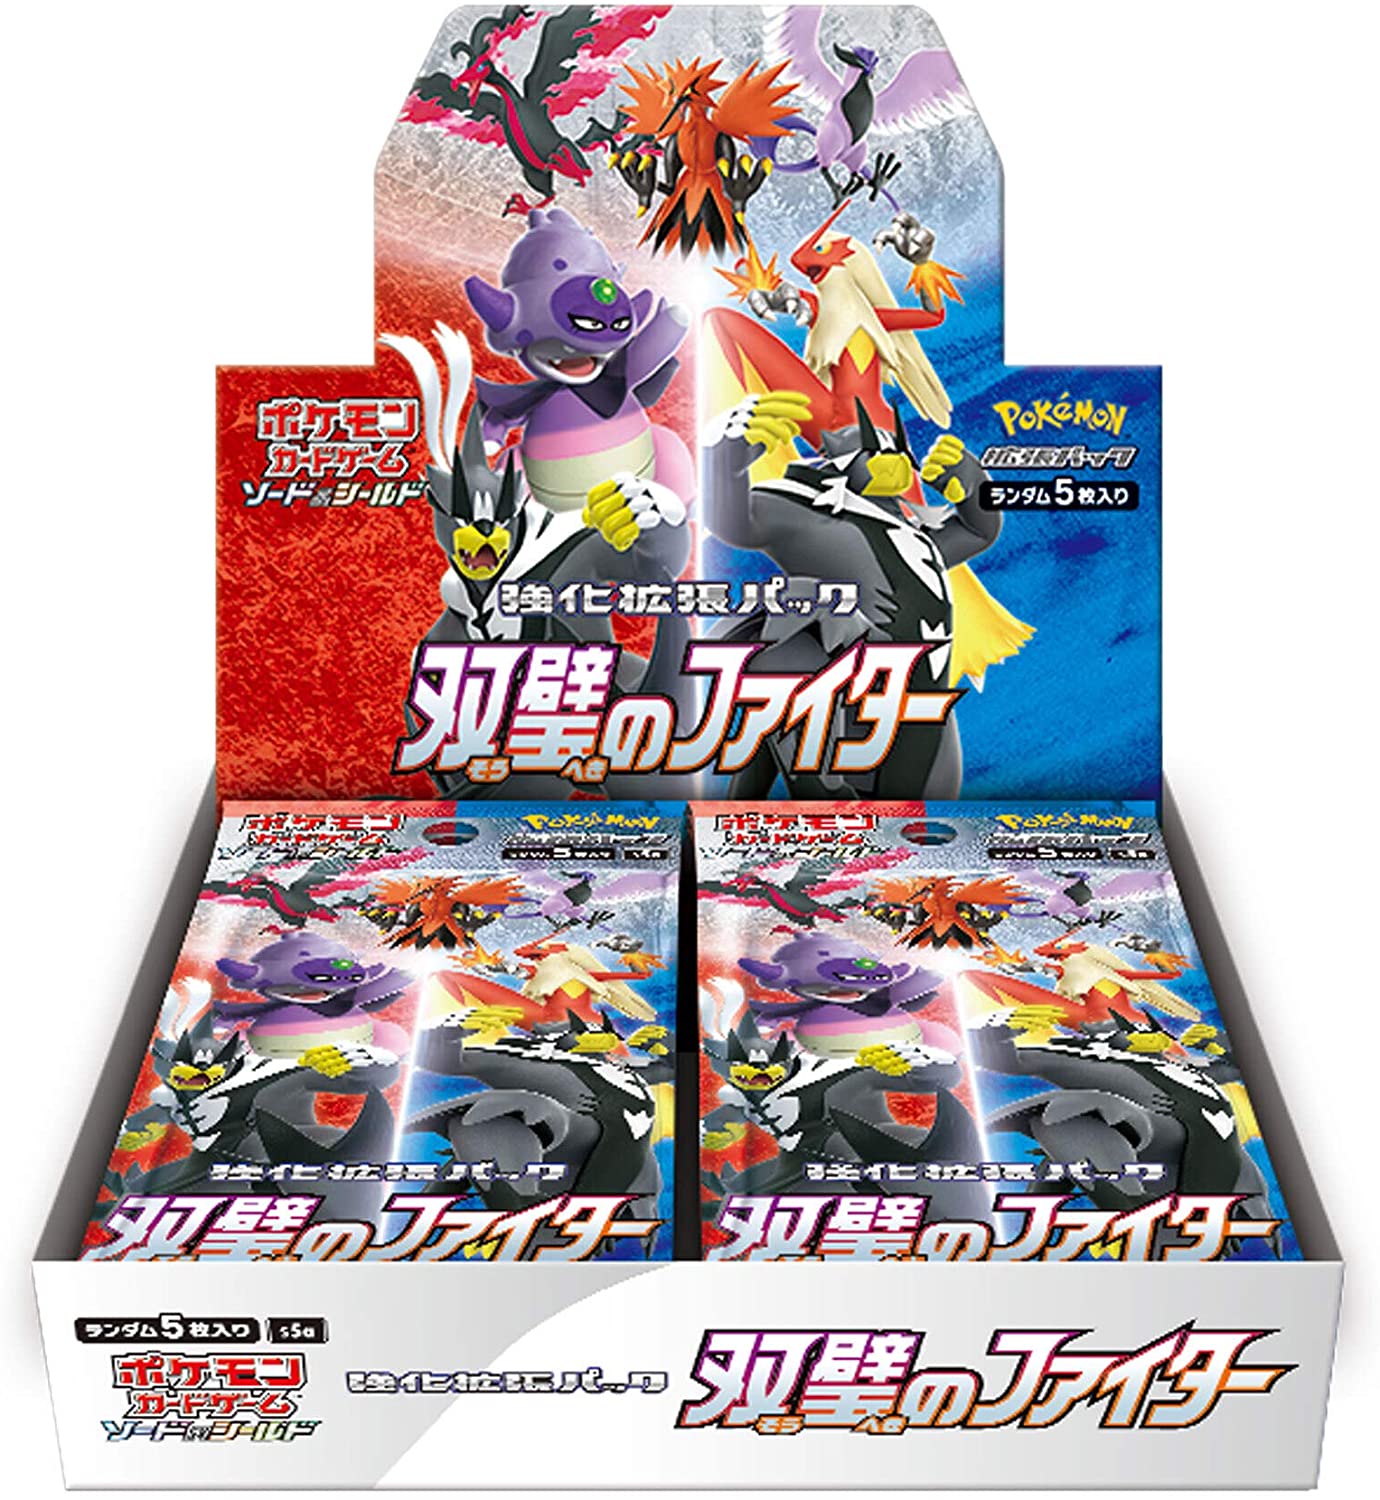 [S5a] POKÉMON CARD GAME Sword & Shield Expansion pack ｢Matchless Fighters｣ BOX